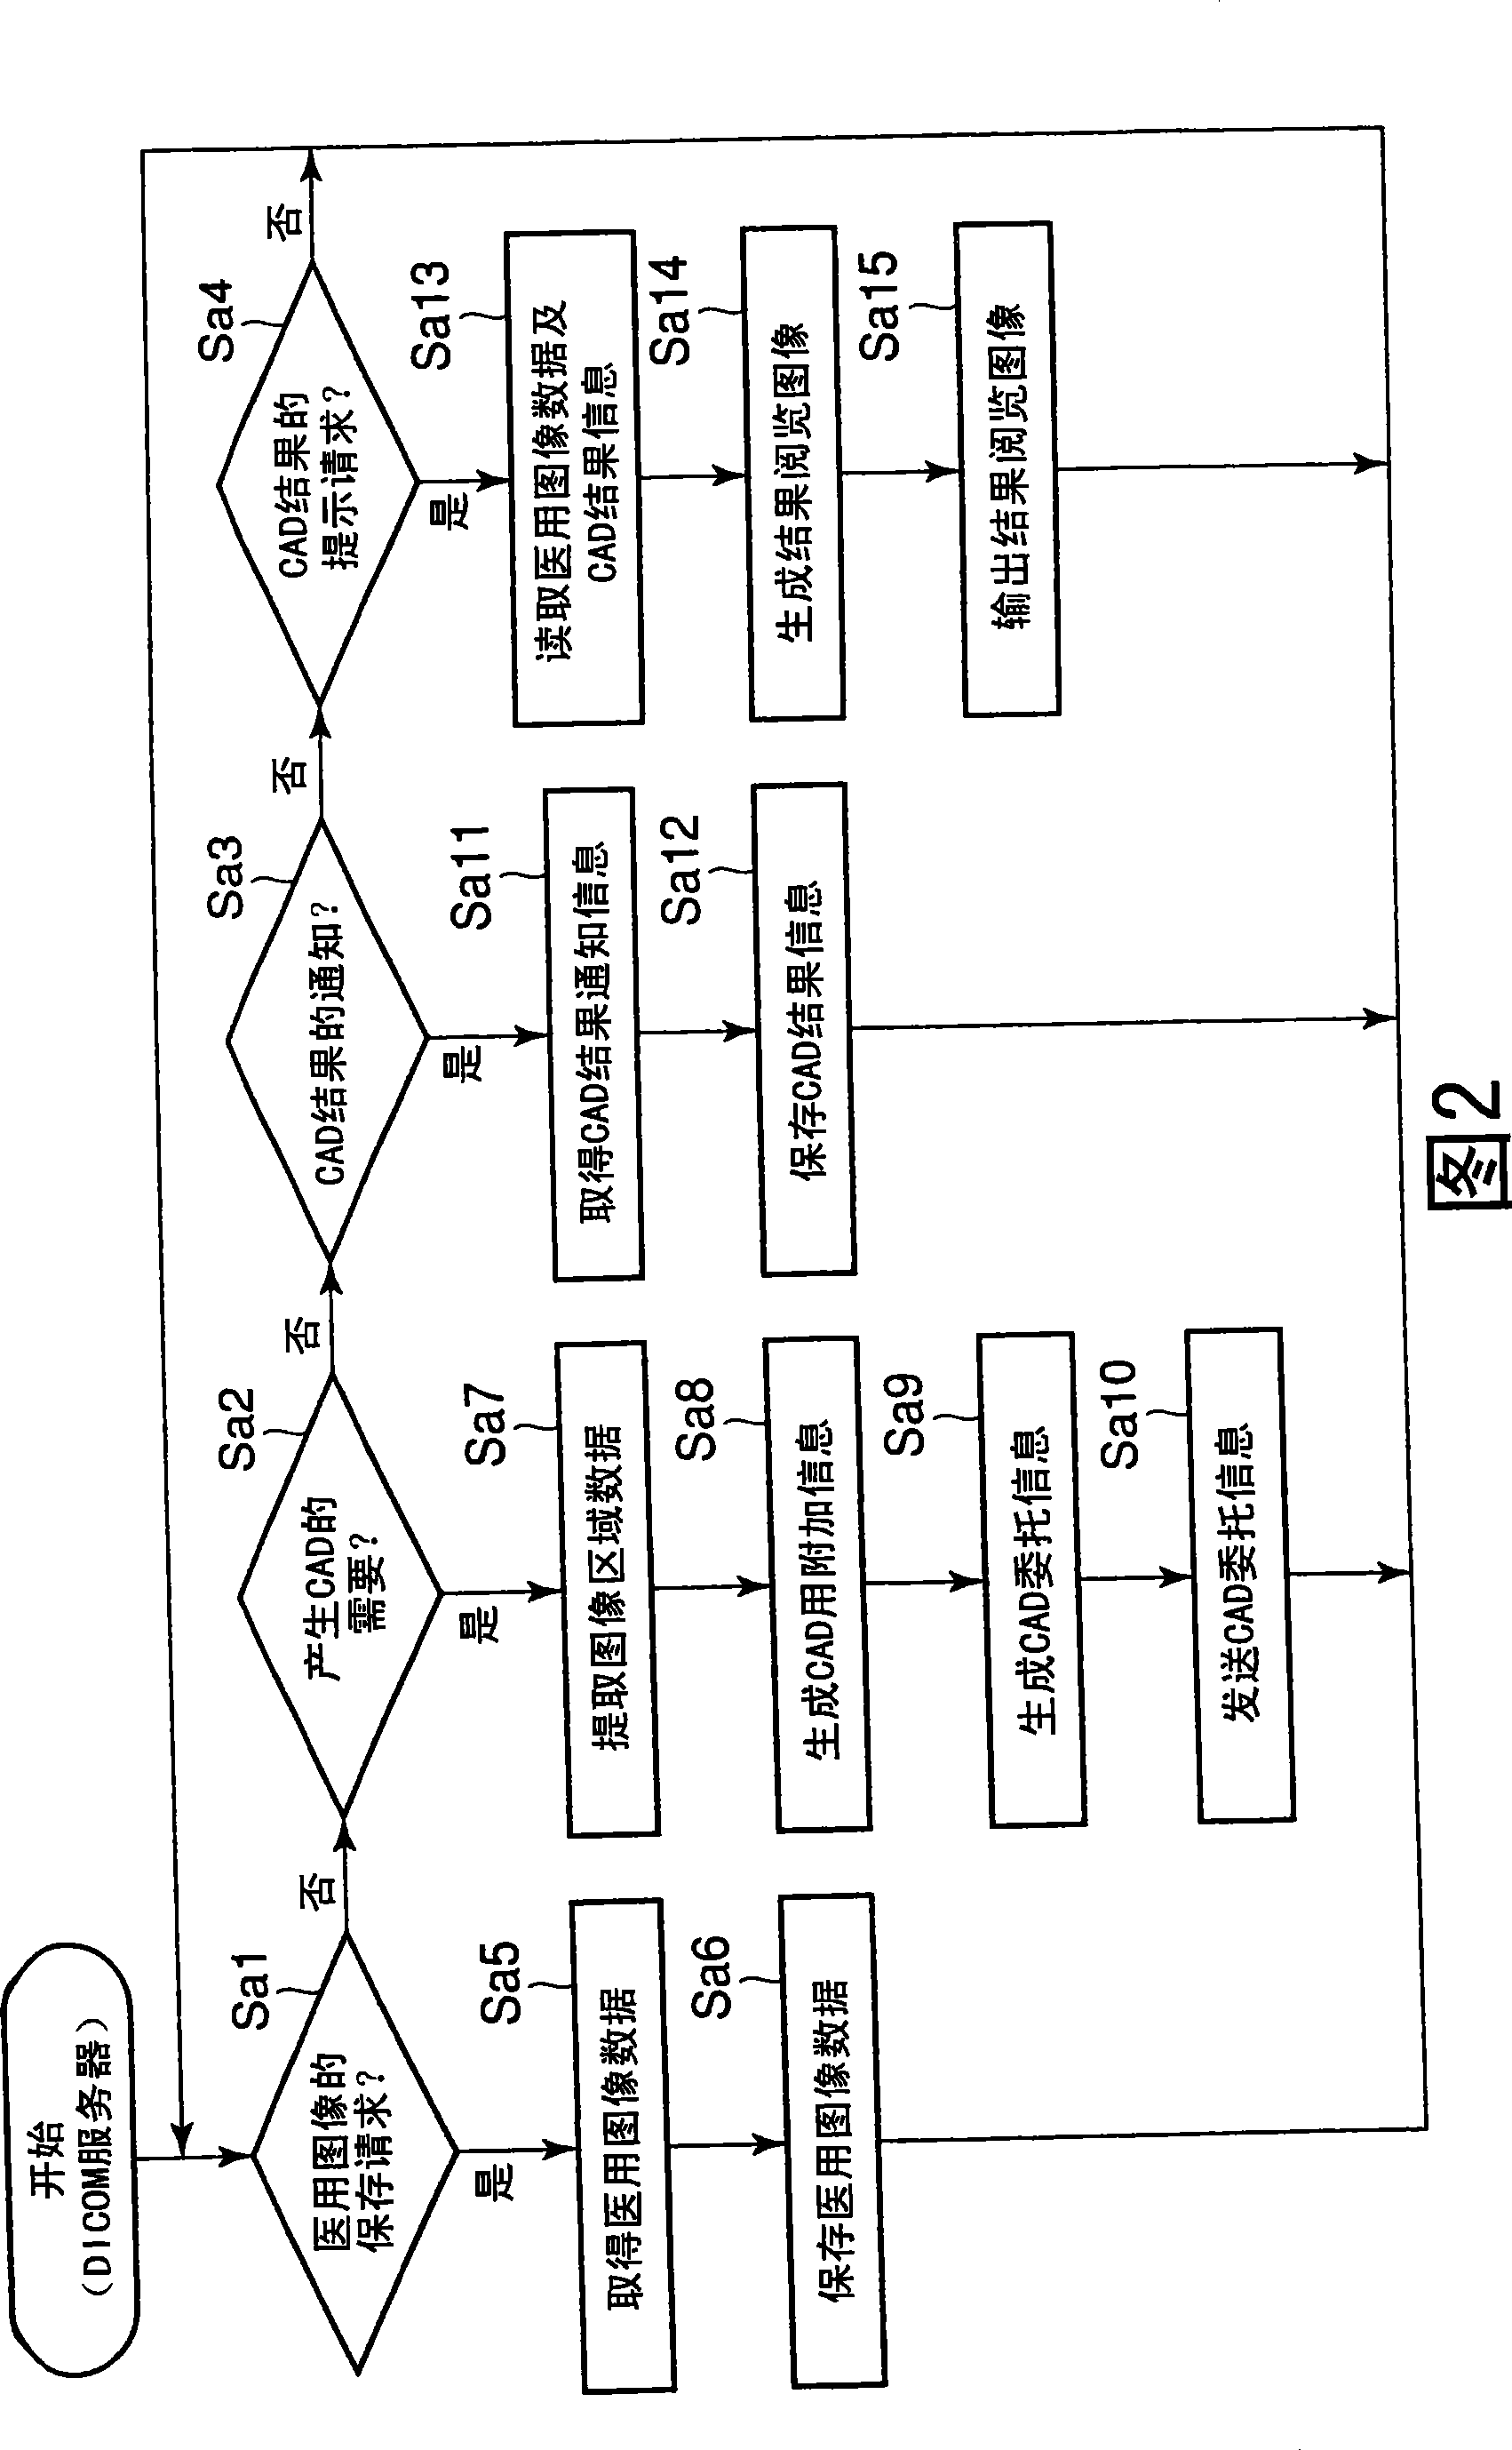 Image diagnosis support system, medical image management apparatus, image diagnosis support processing apparatus and image diagnosis support method